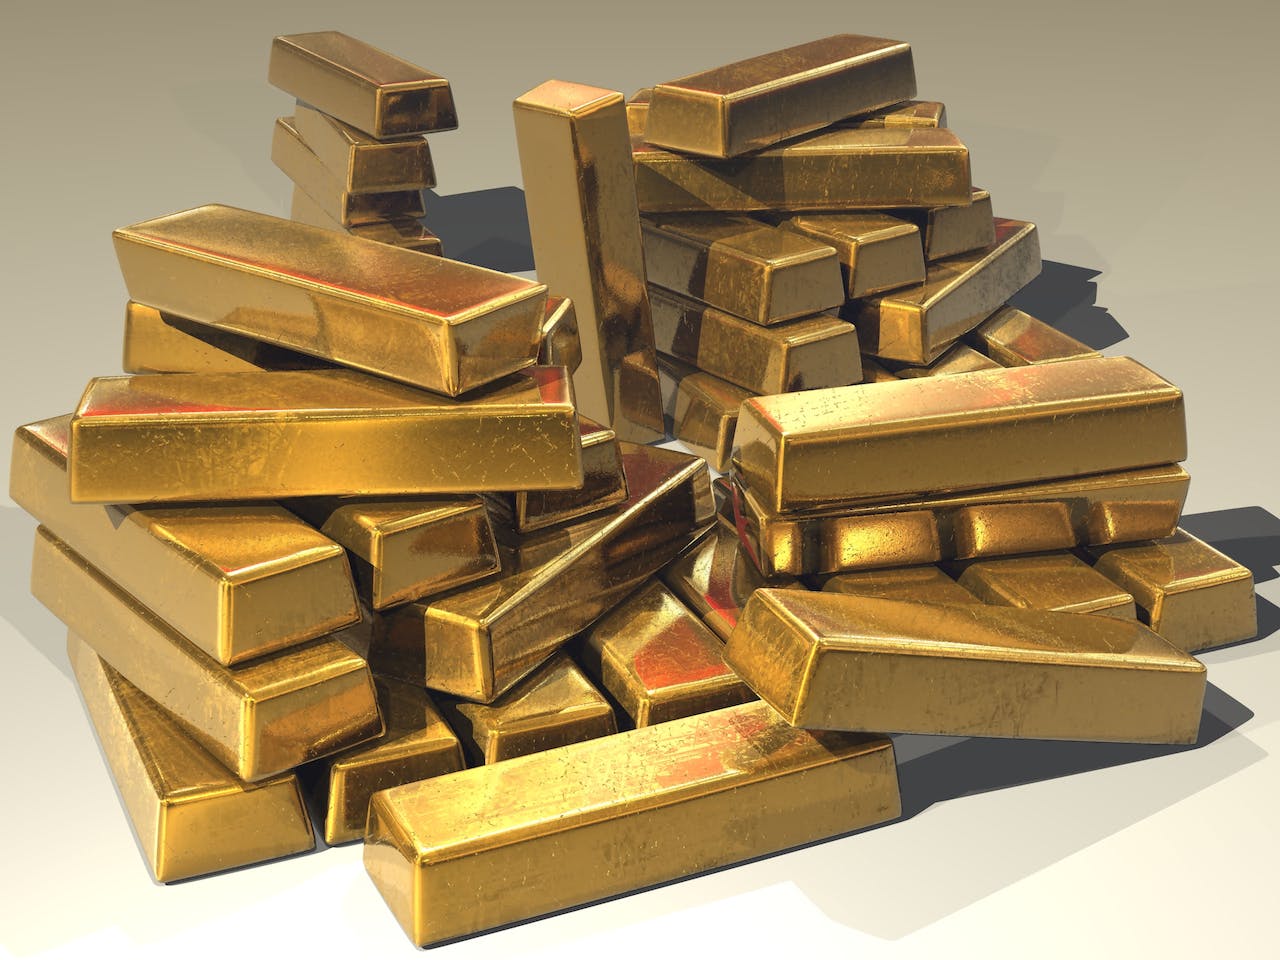 Lear Capital Shares What You Need To Know About Government Debt and the Price of Gold